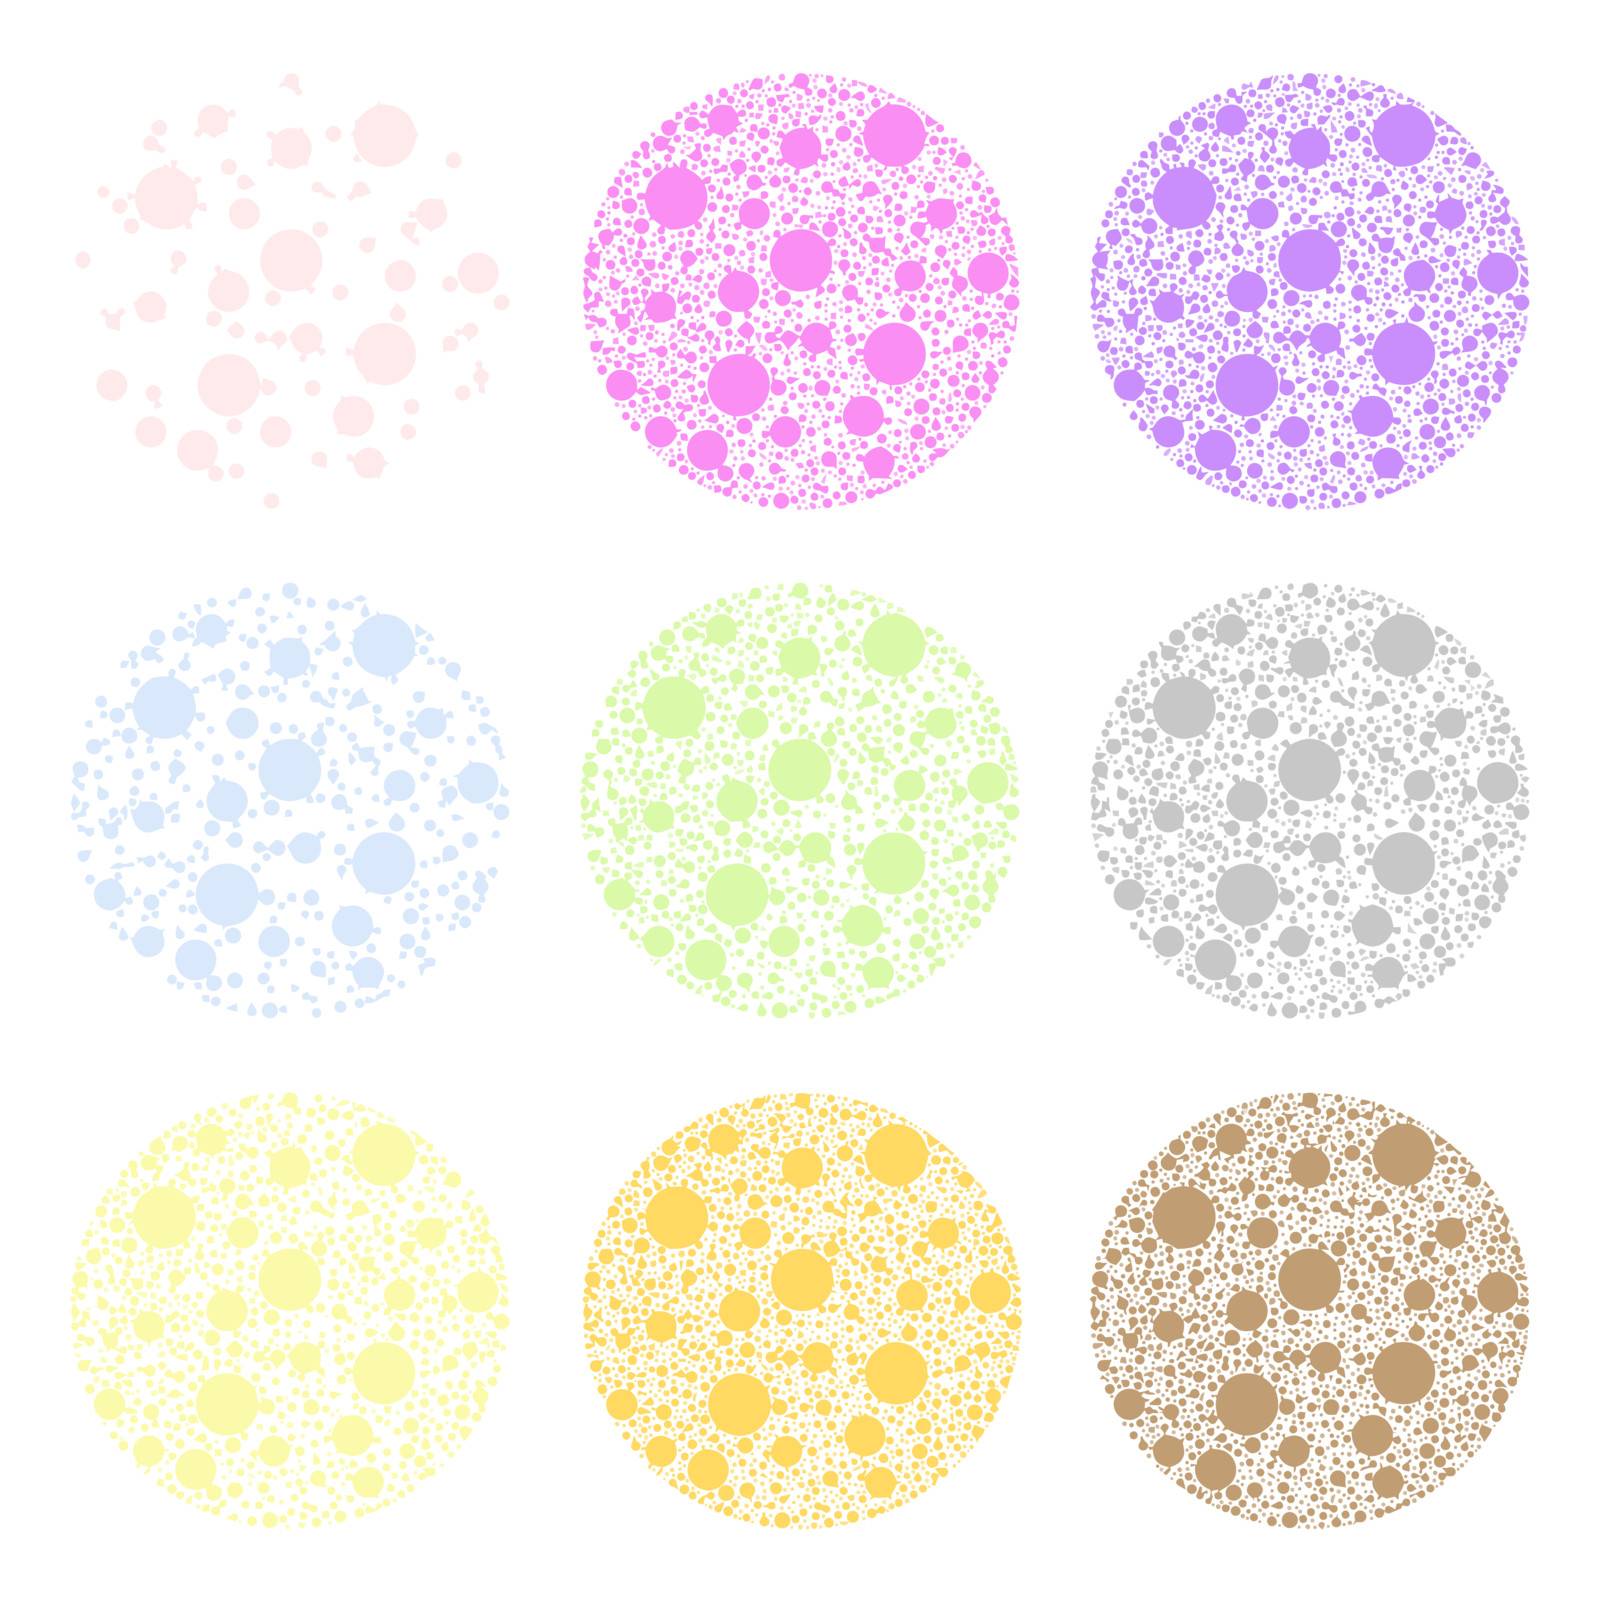 Different color polka dots collection on white background